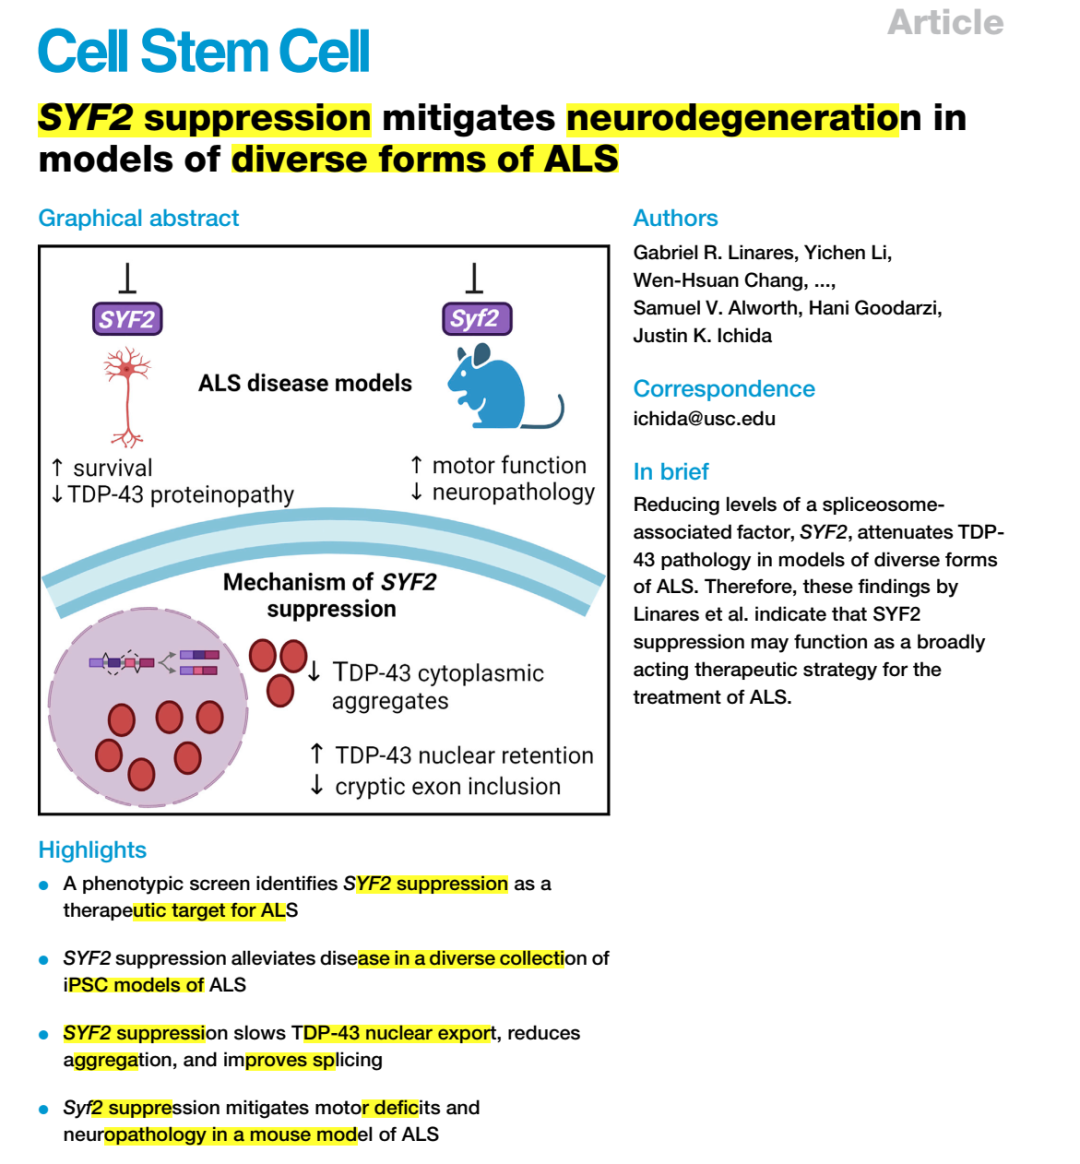 Cell Stem Cell：渐冻症<font color="red">研究</font>重磅突破：抑制SYF2可改善多个ALS疾病模型<font color="red">的</font>神经变性过程